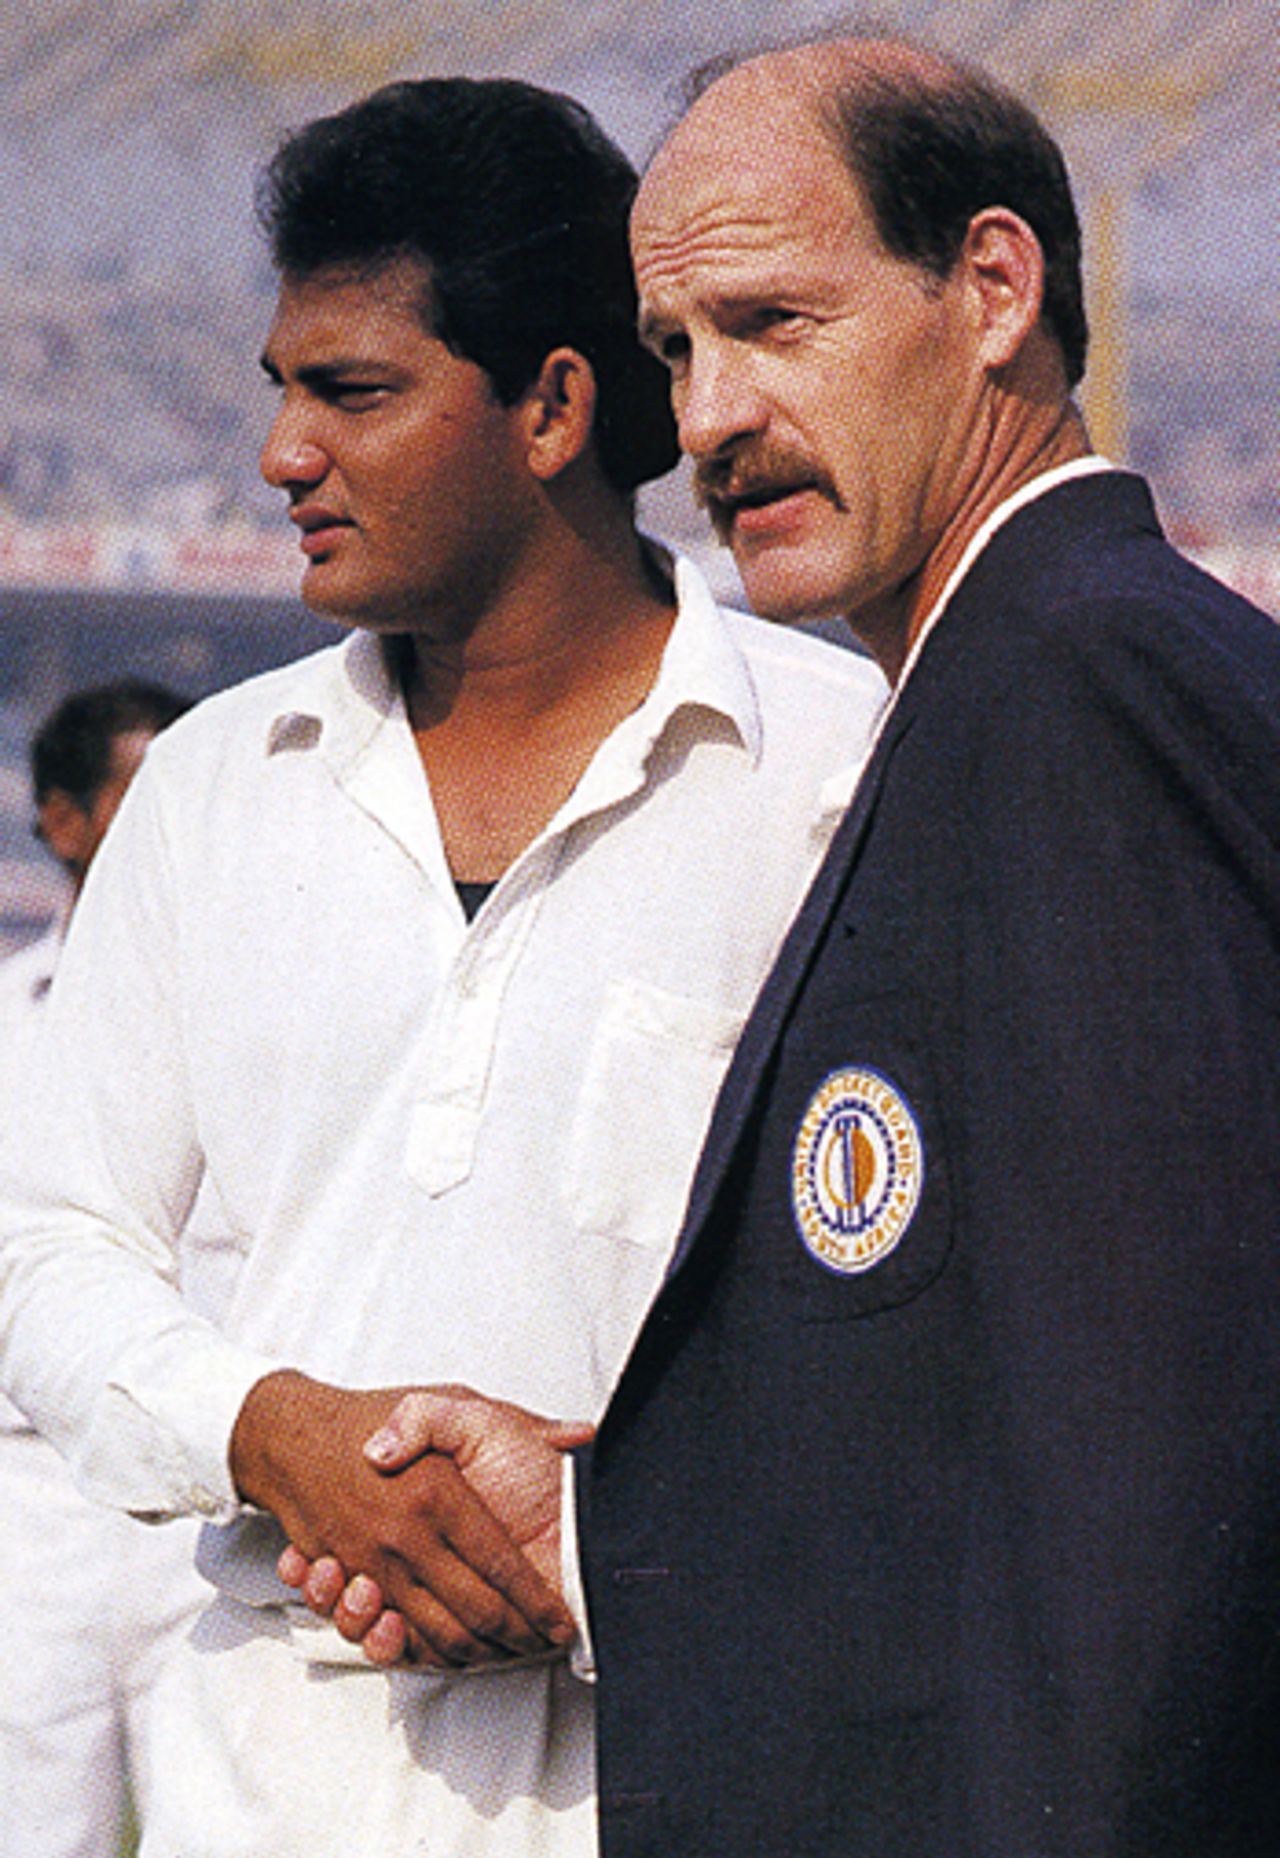 Mohammad Azharuddin and Clive Rice shake hands ahead of the toss, India v South Africa, 1st ODI, Calcutta, November 10, 1991